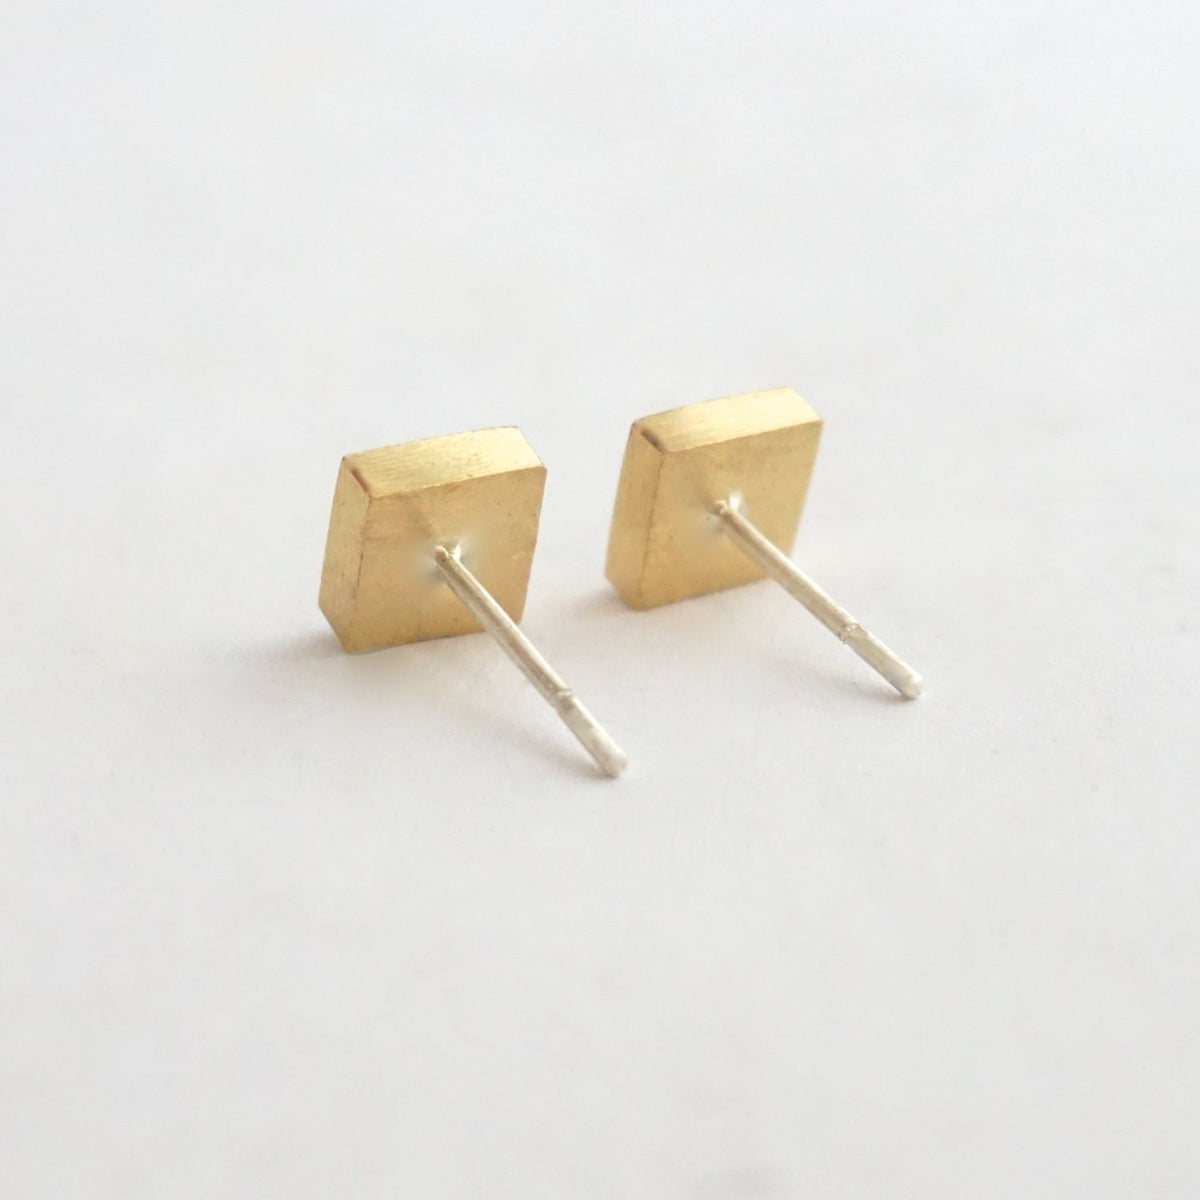 Affordable Hand-Crafted Gold Colored Brass or Sterling Silver Square Stud Earrings - 0170 - Virginia Wynne Designs